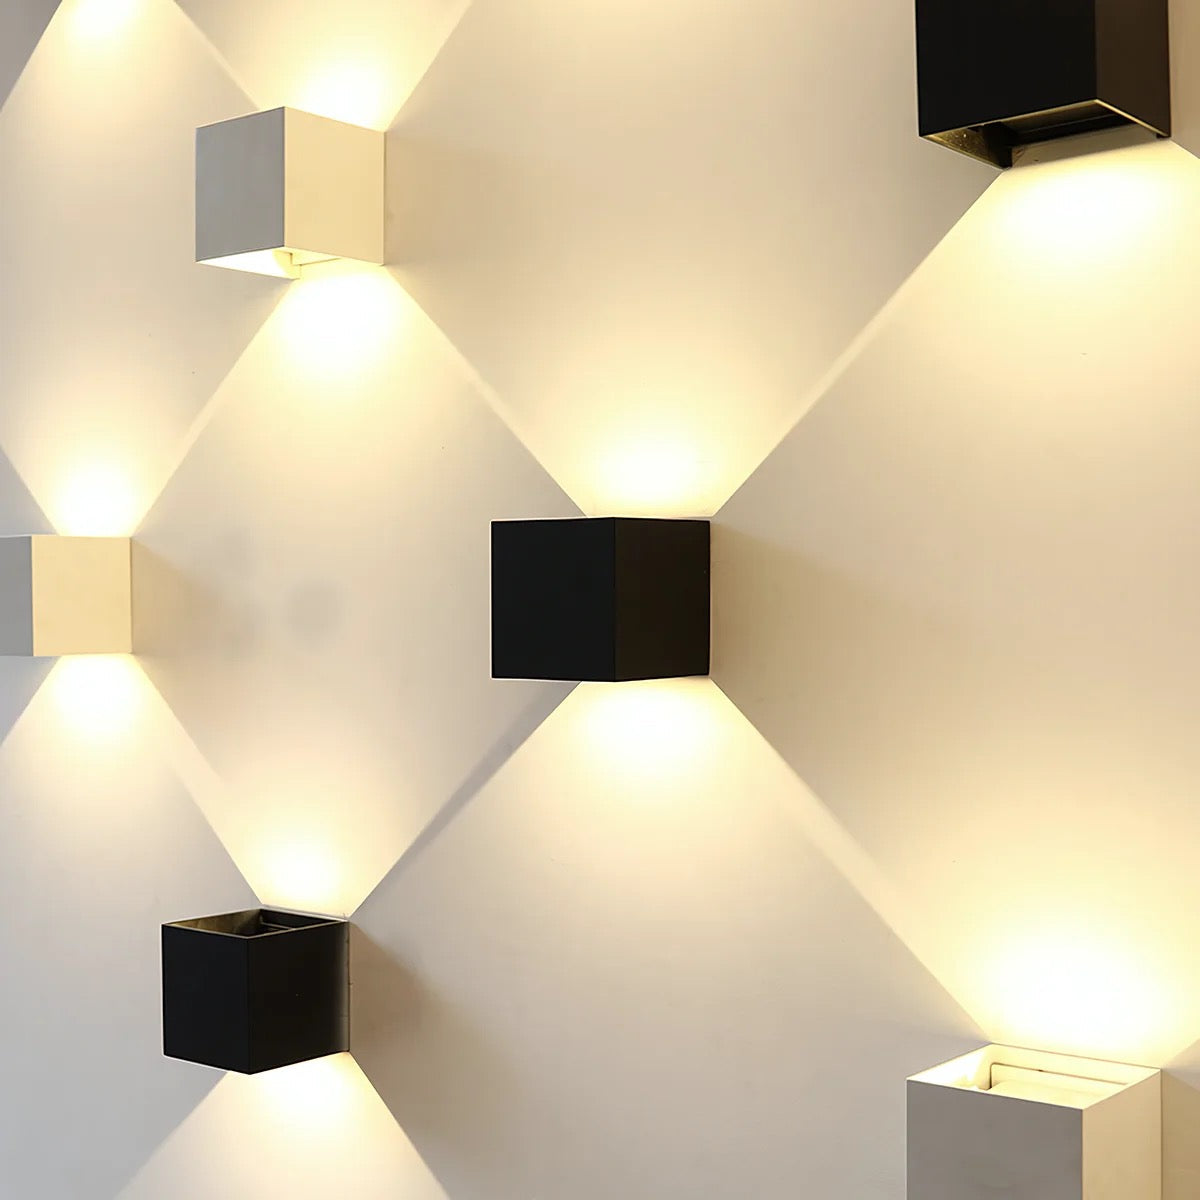 The Luxurious Wall Light with Motion Sensor